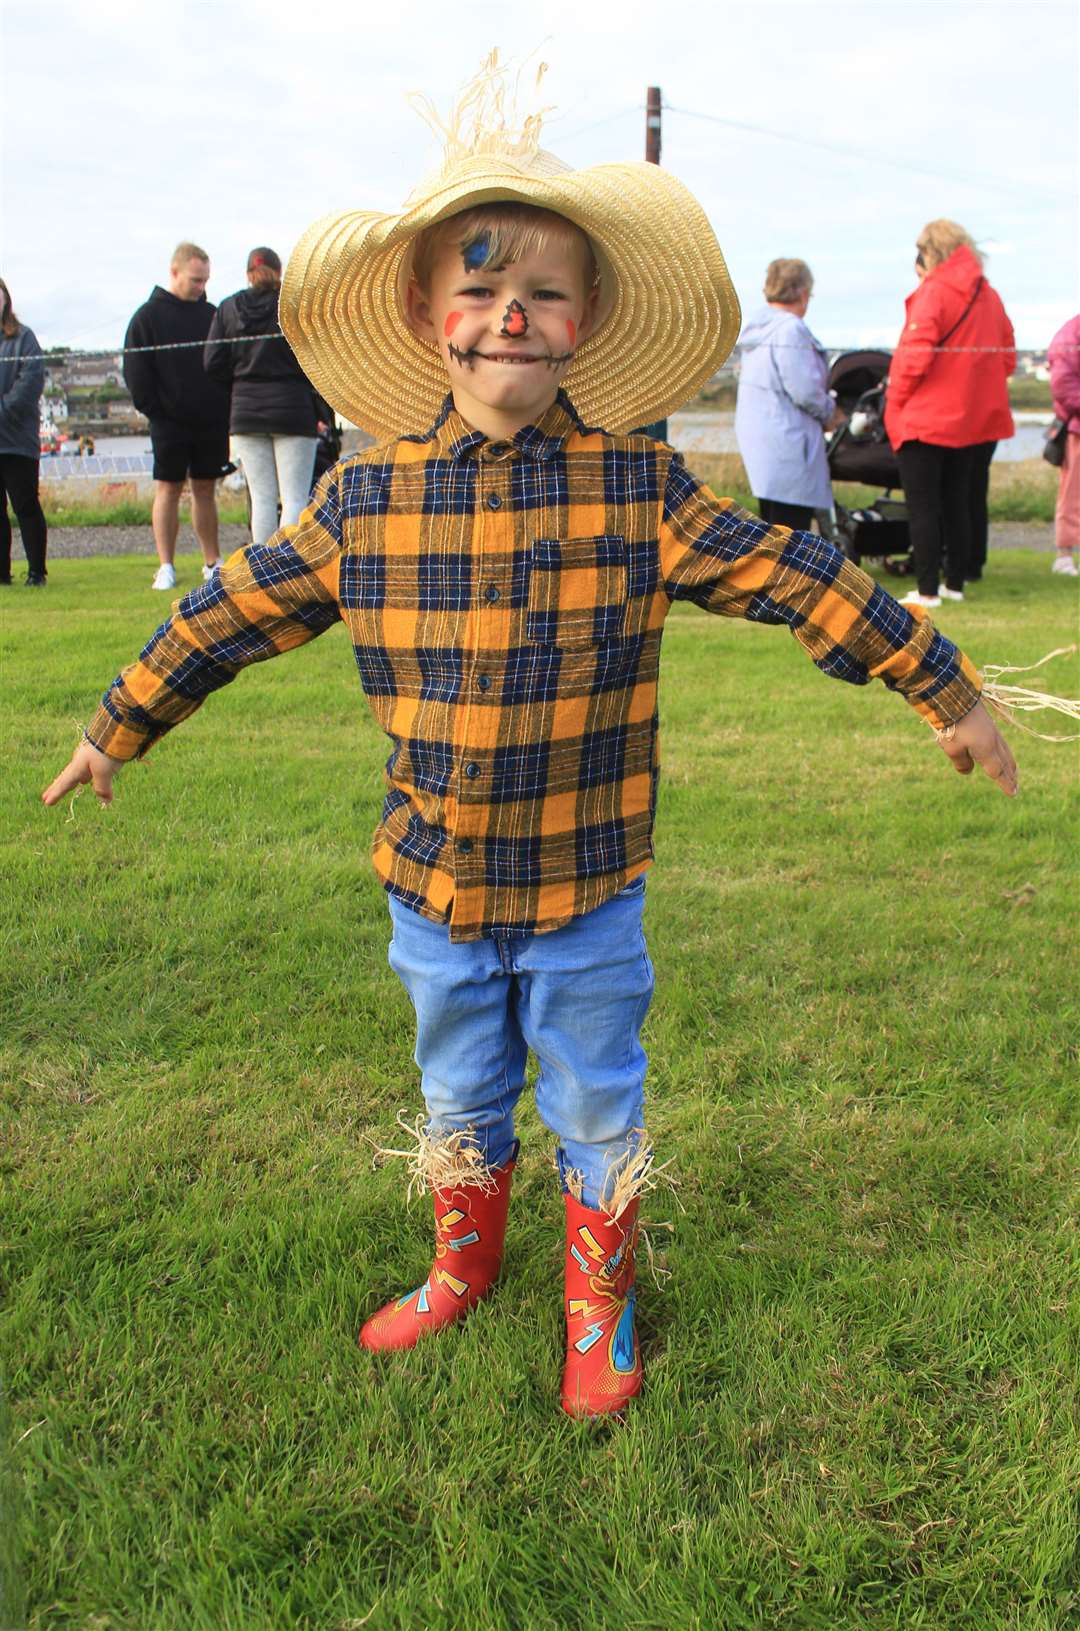 Four-year-old Izaak Oliphant was awarded first prize in his age group for his scarecrow outfit.